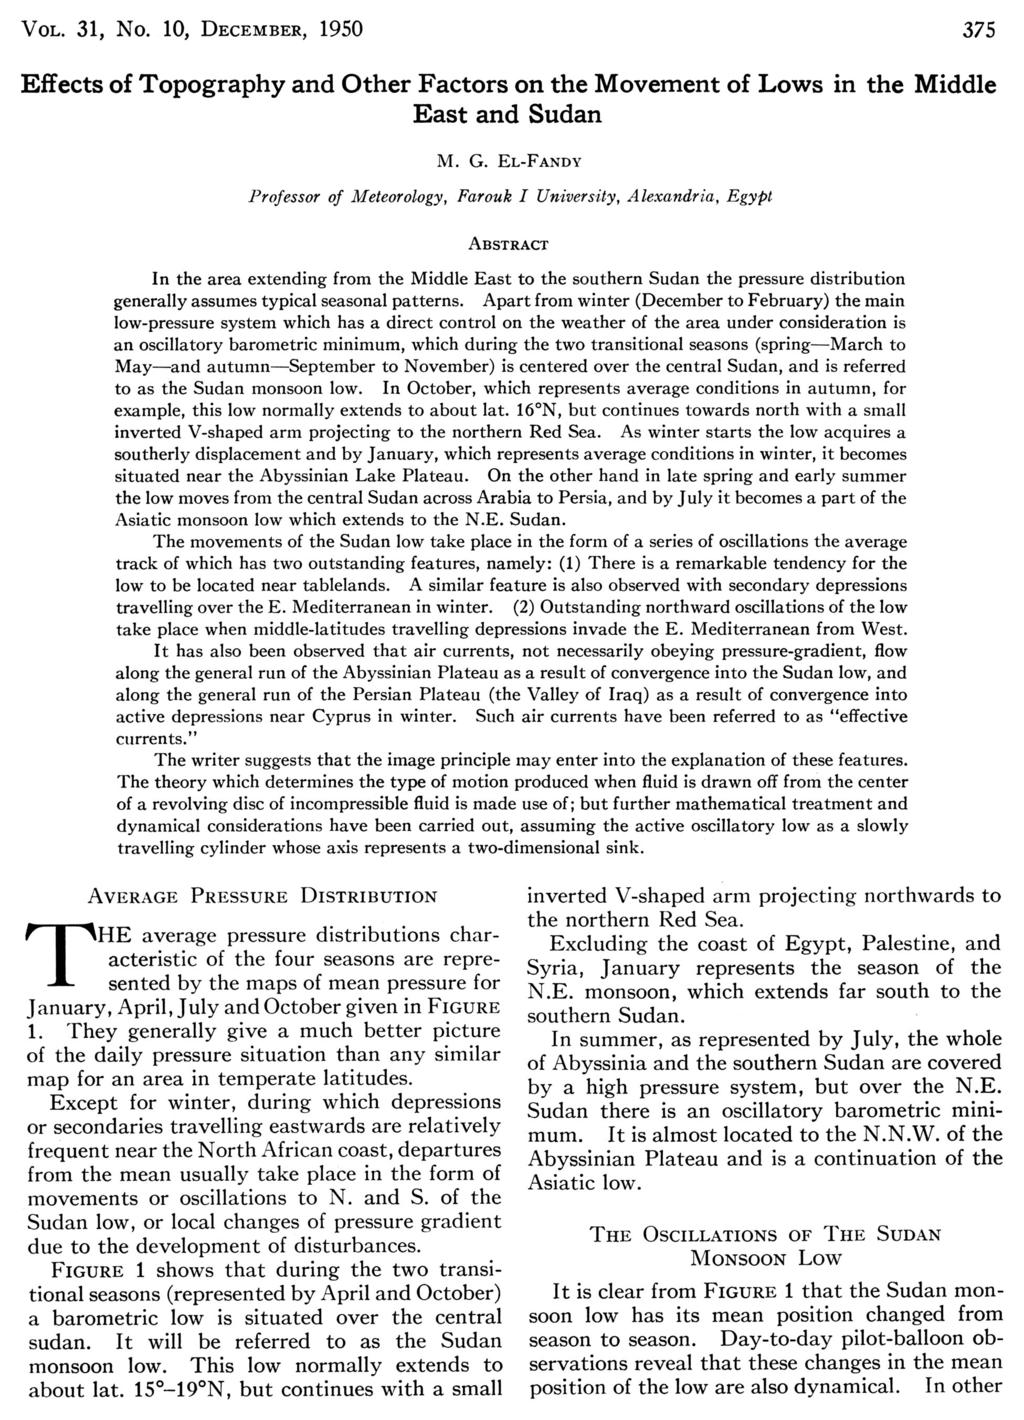 VOL. 31, No. 10, DECEMBER, 1950 375 Effects of Topography and Other Factors on the Movement of Lows in the Middle East and Sudan M. G.